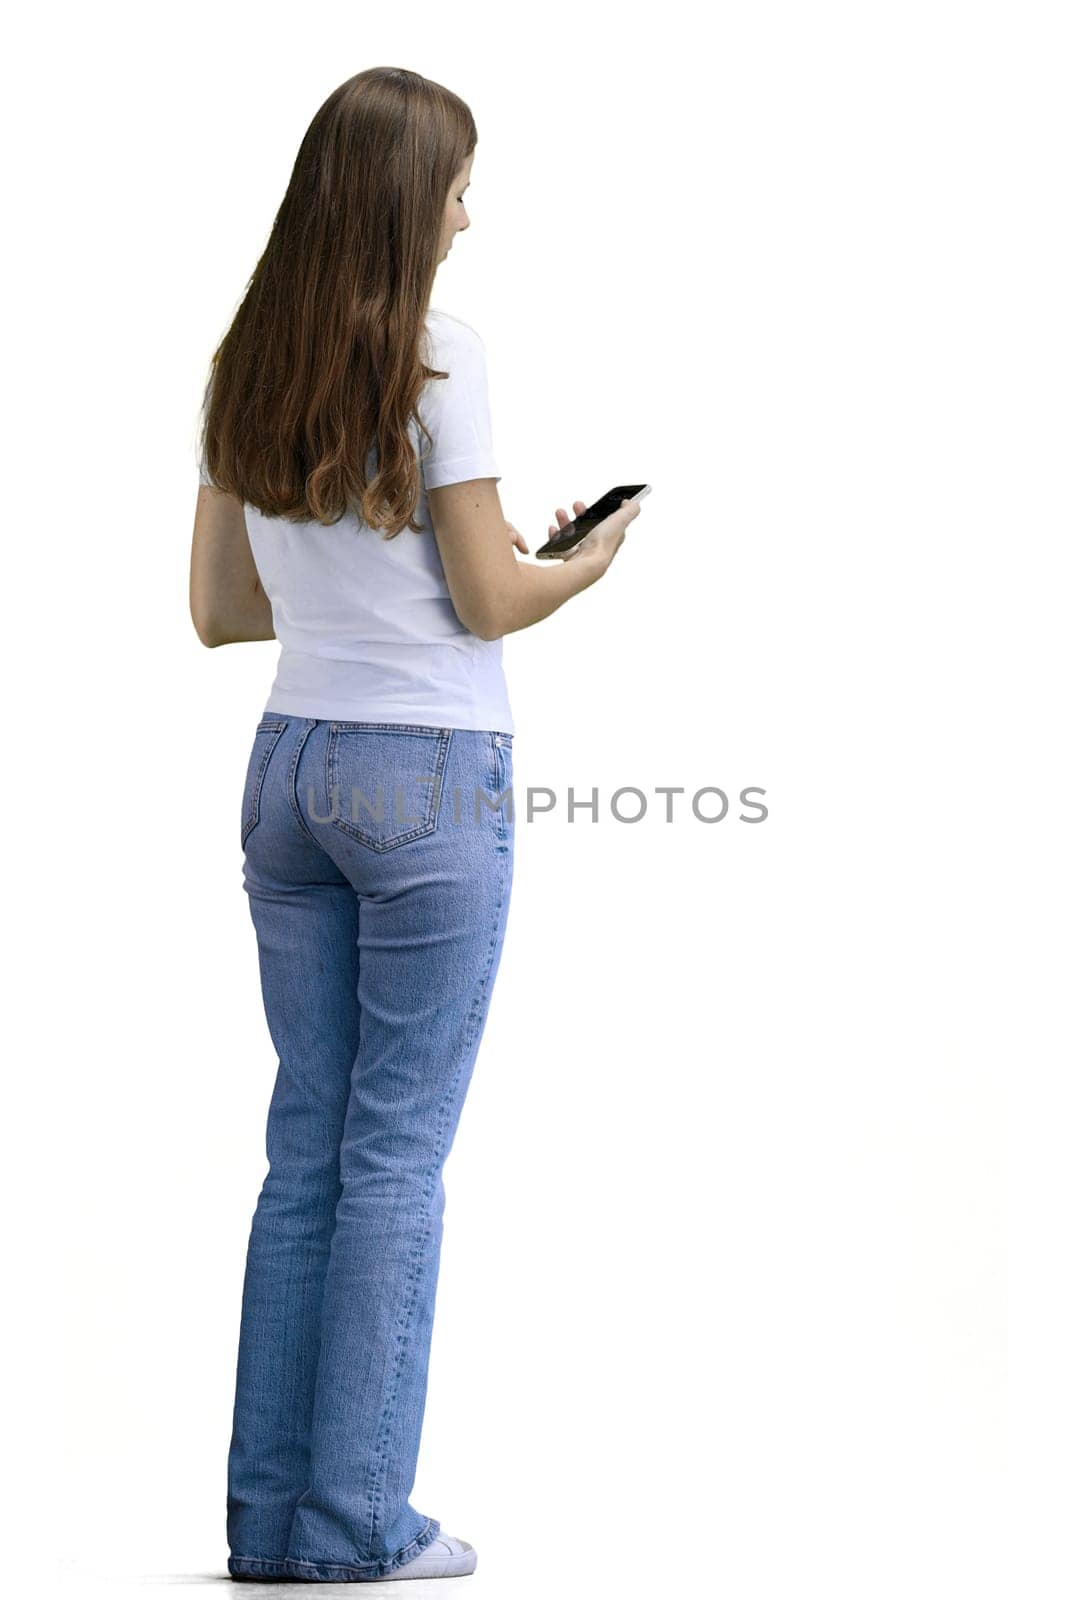 A woman, full-length, on a white background, with a phone by Prosto